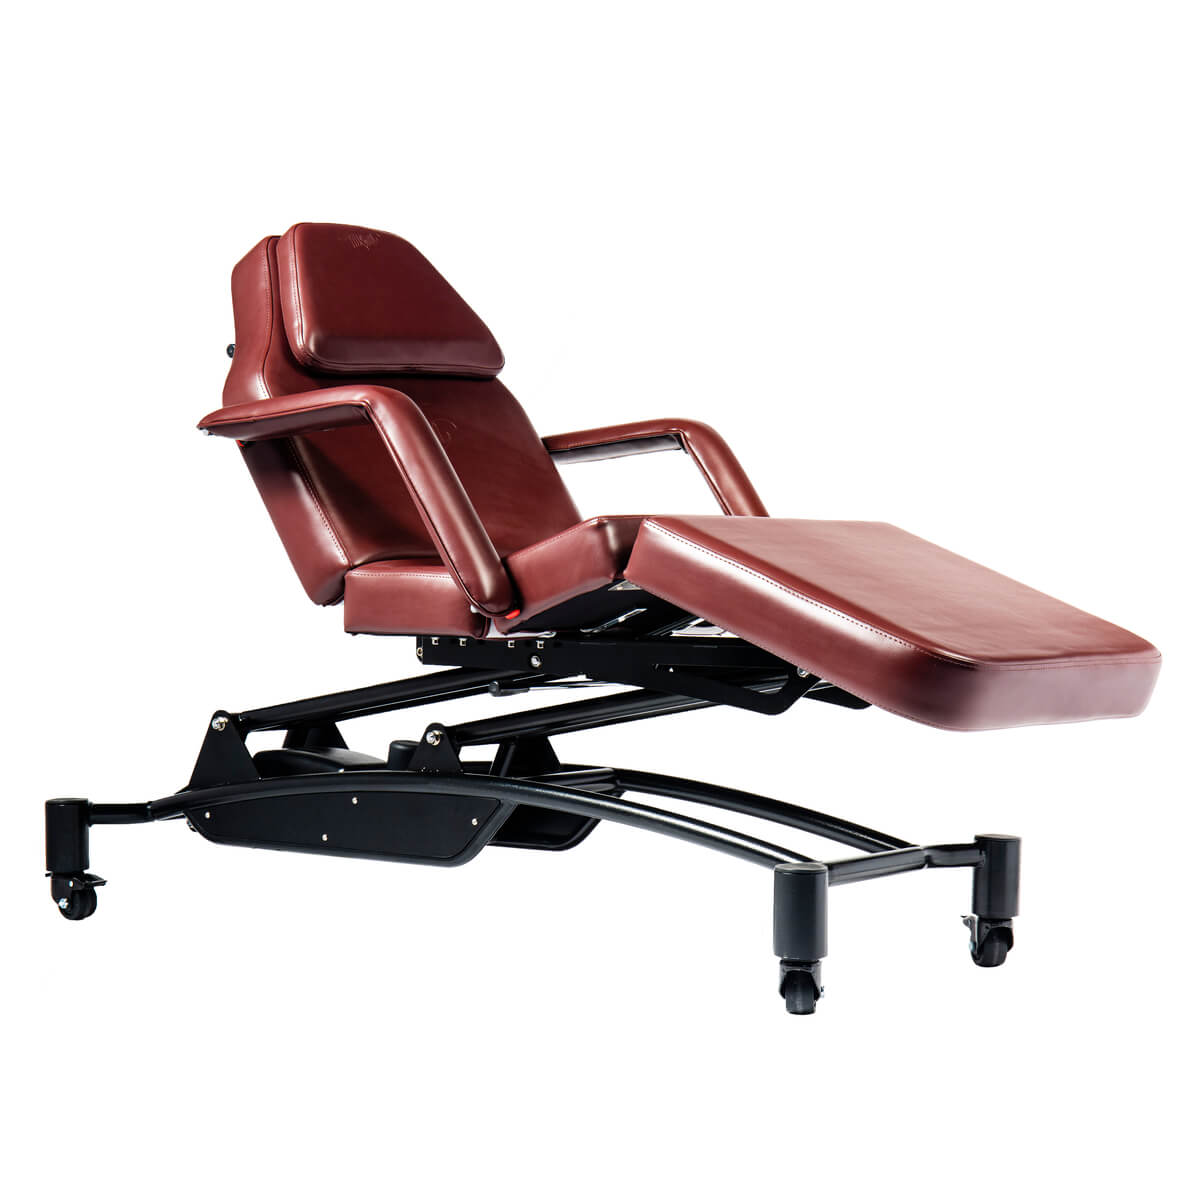 Tat Tech Hydraulic Chair - Tat Tech Hydraulic Chair - Shop Chairs & Tables  - Equipments & Furnitures - Black Tattoo Ink